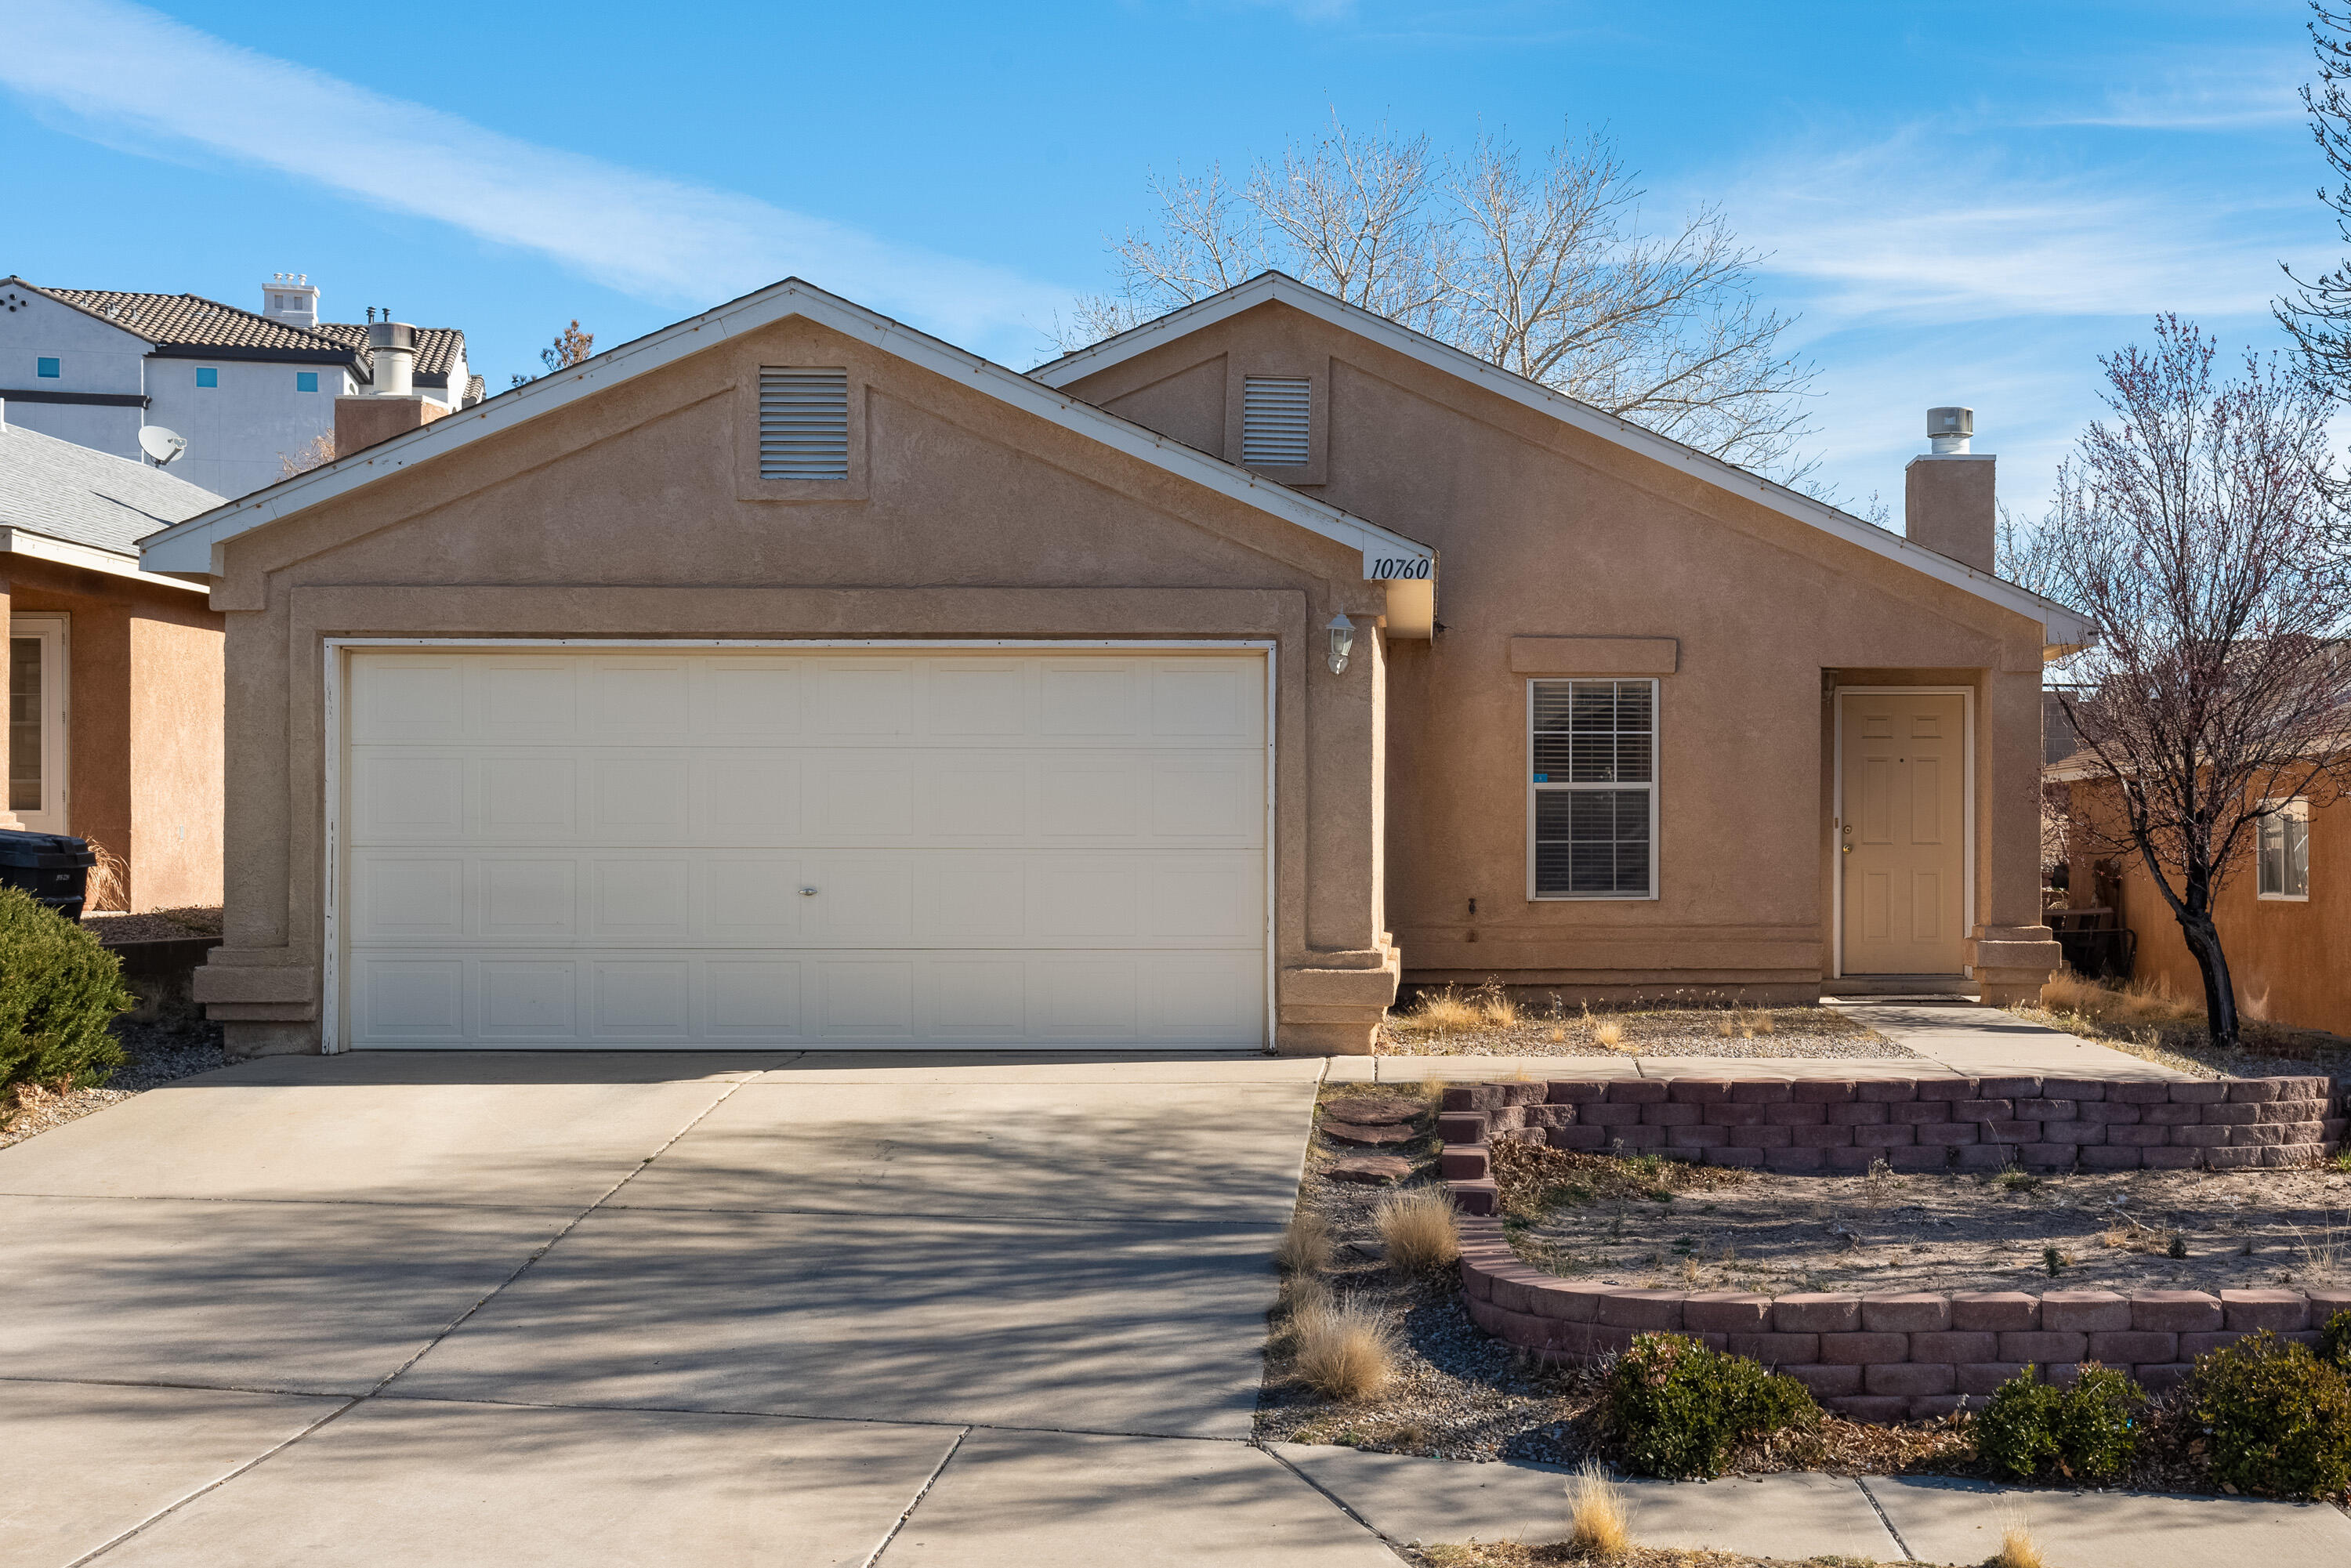 10760 Galaxia Park Drive NW, Albuquerque, New Mexico 87114, 4 Bedrooms Bedrooms, ,2 BathroomsBathrooms,Residential,For Sale,10760 Galaxia Park Drive NW,1058376